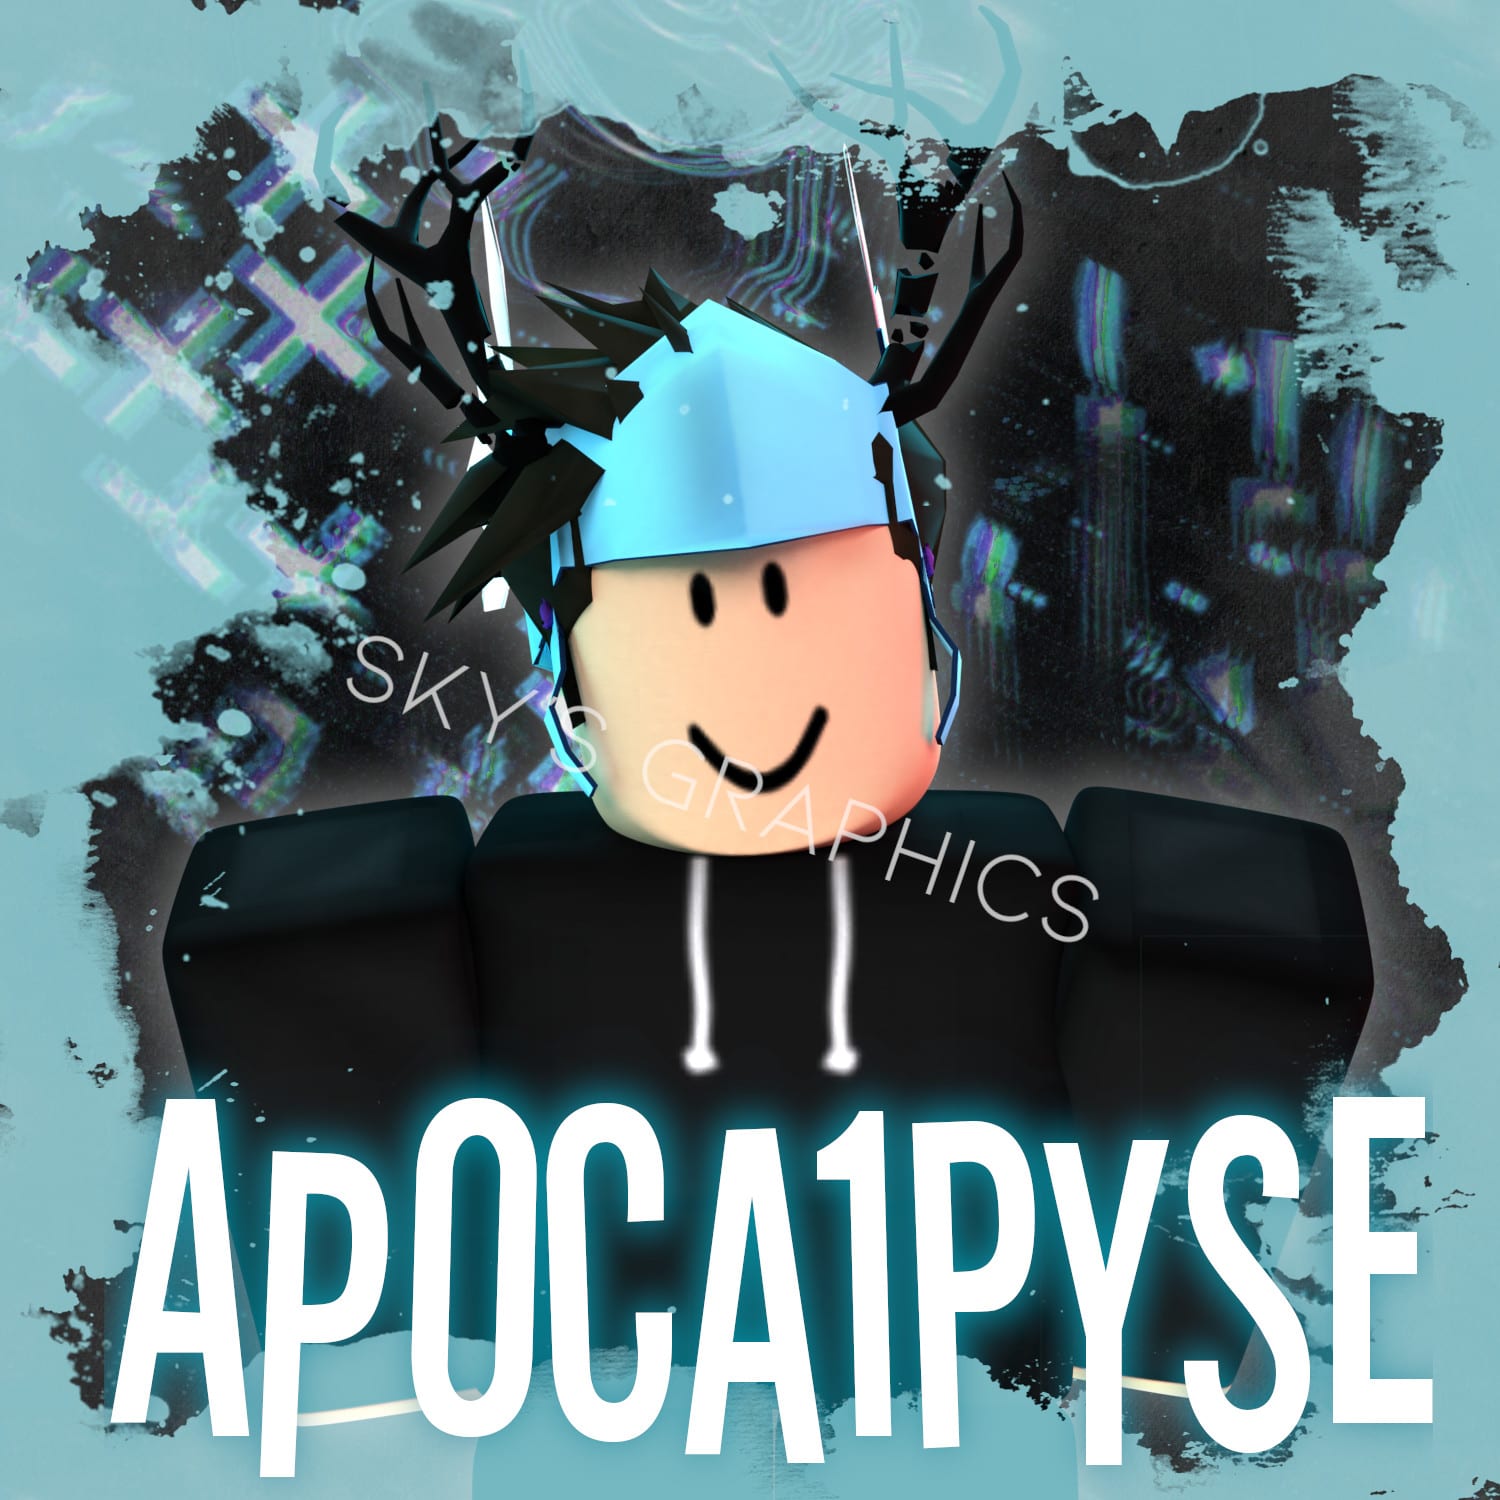 Make A Professional Roblox Gfx Of Your Character By Skiiess - edited roblox gfx used blender to render